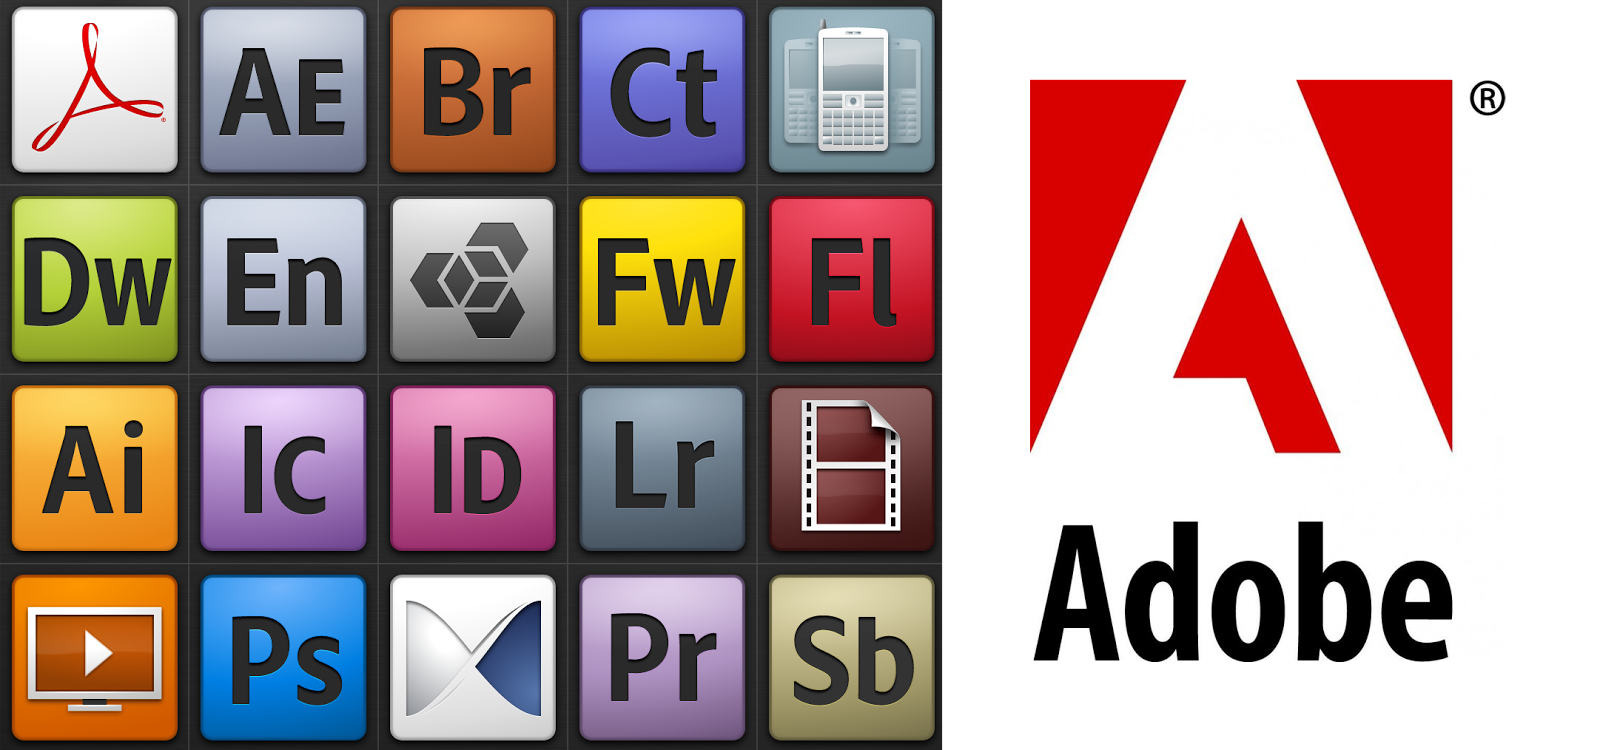 Adobe Cs6 Master Collection Patch Download